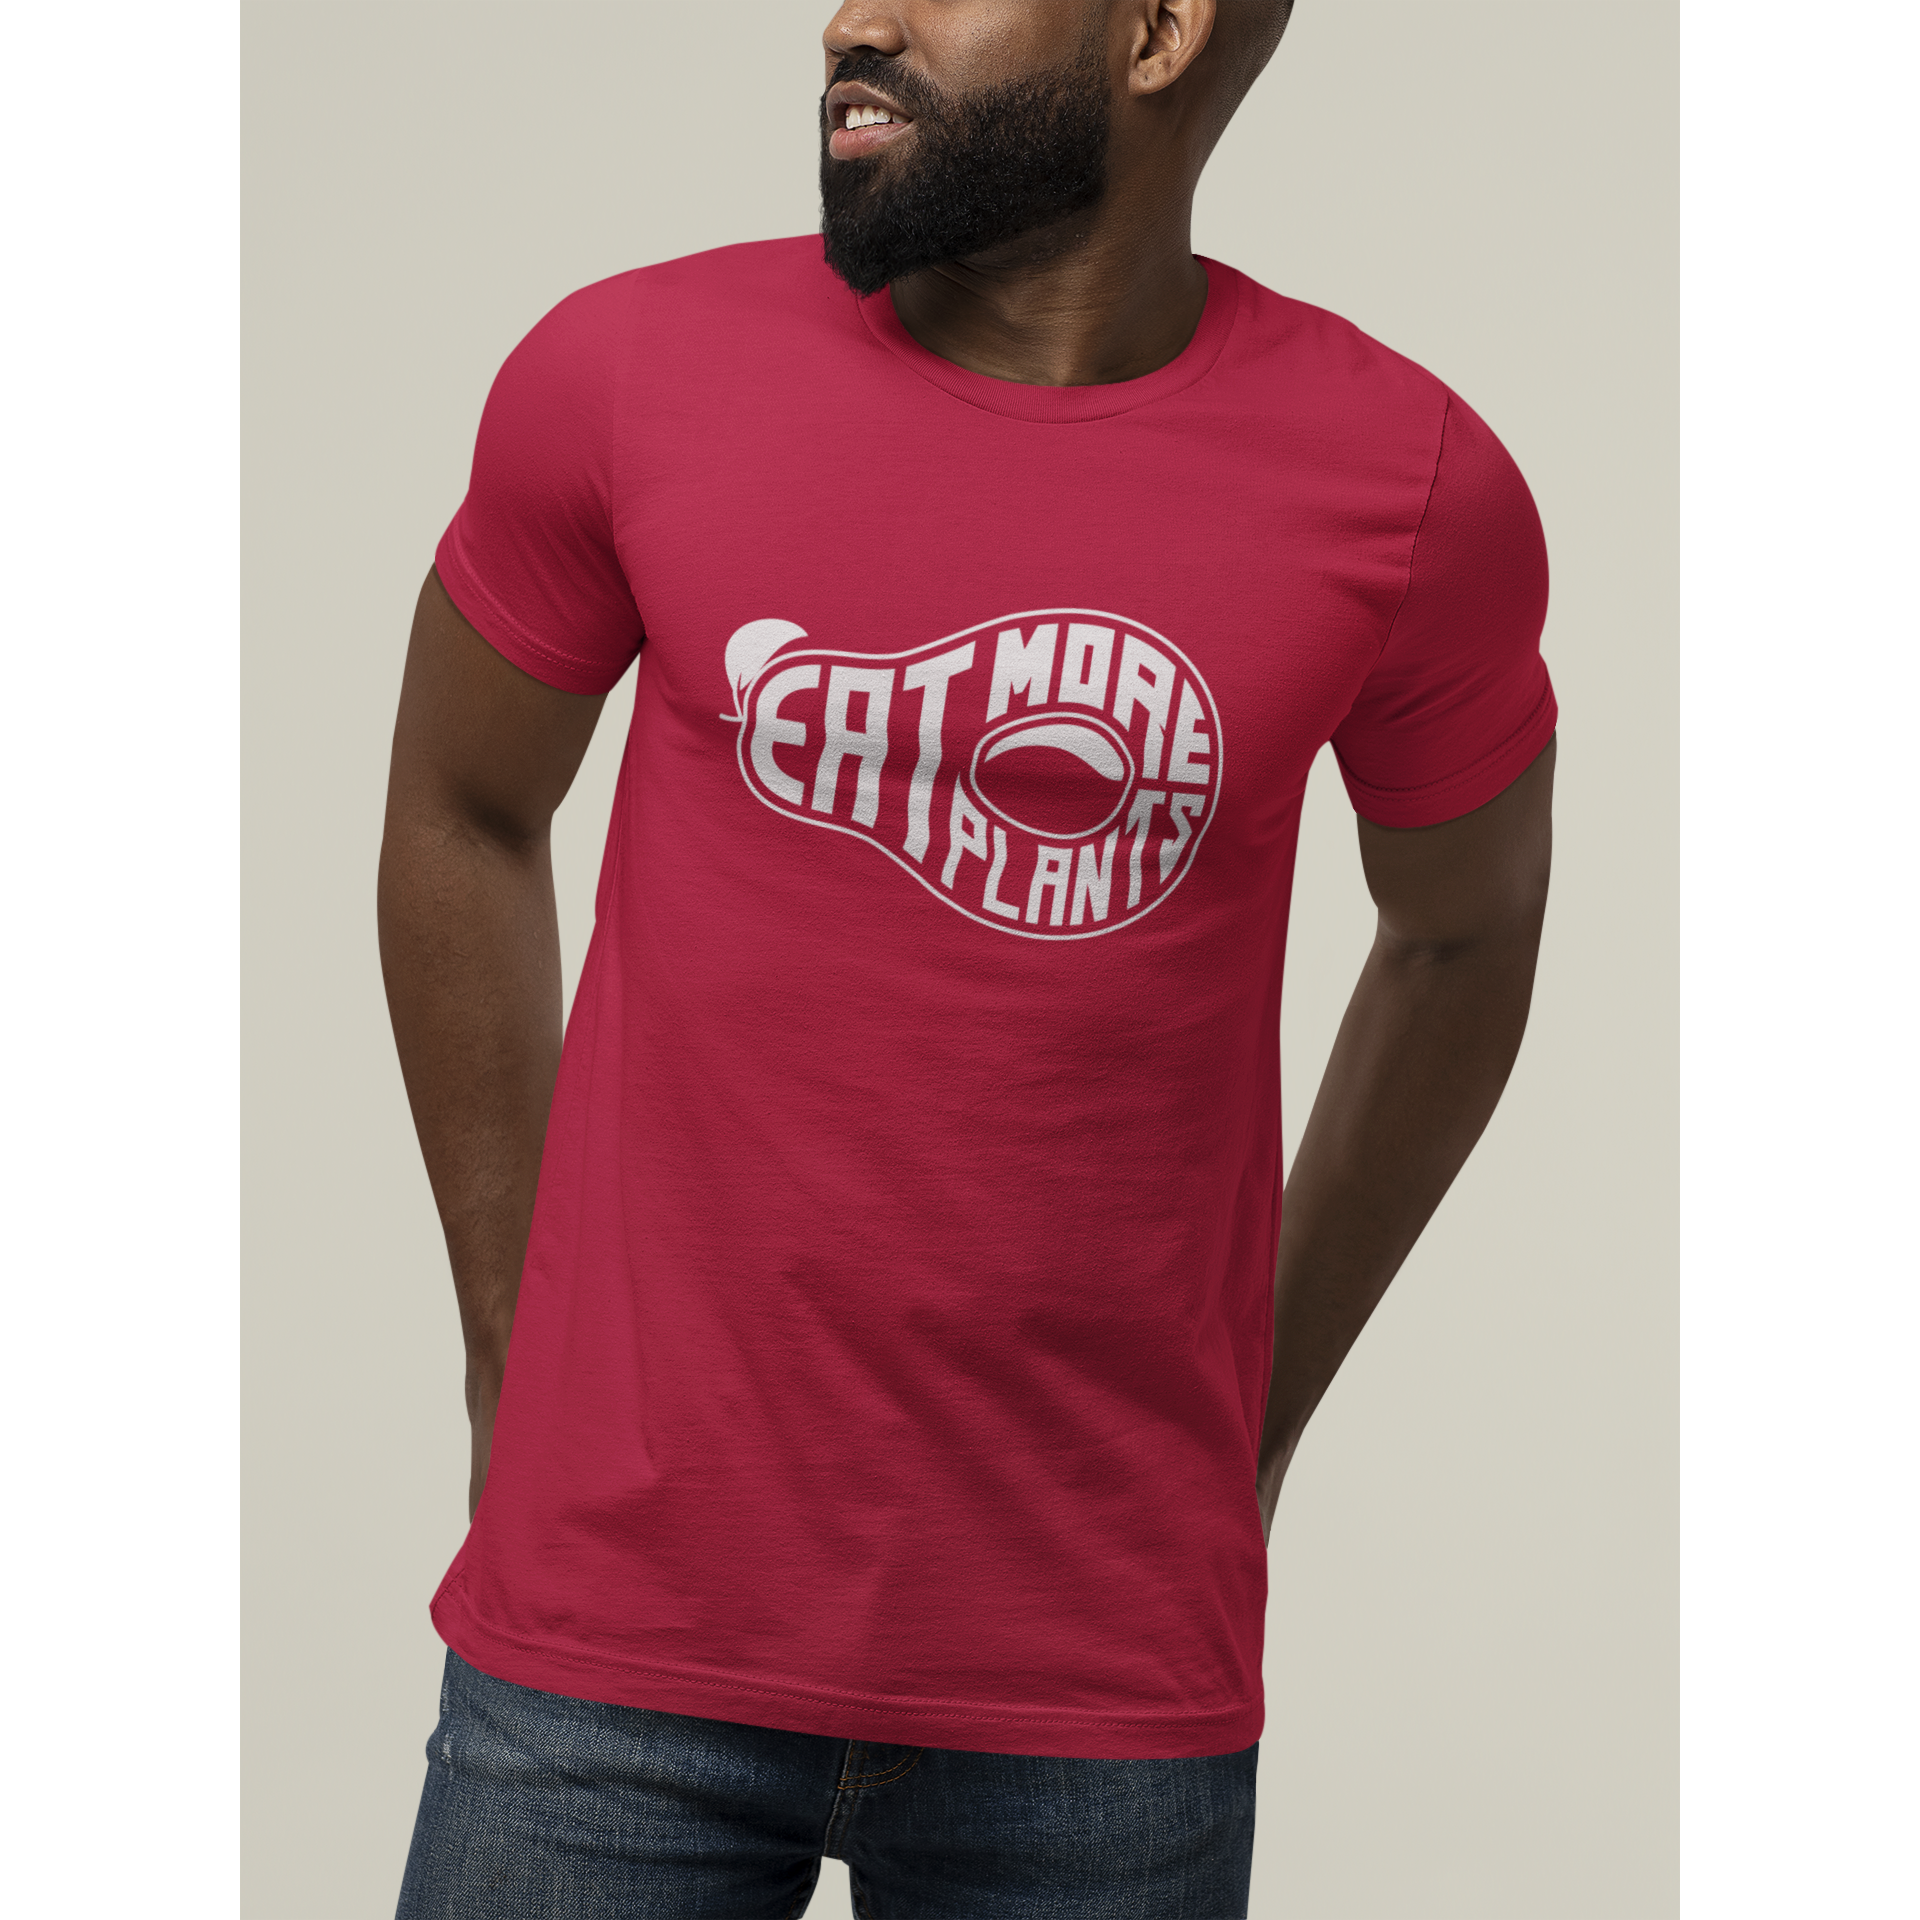 eat more plants on red vegan t shirt worn by man standing